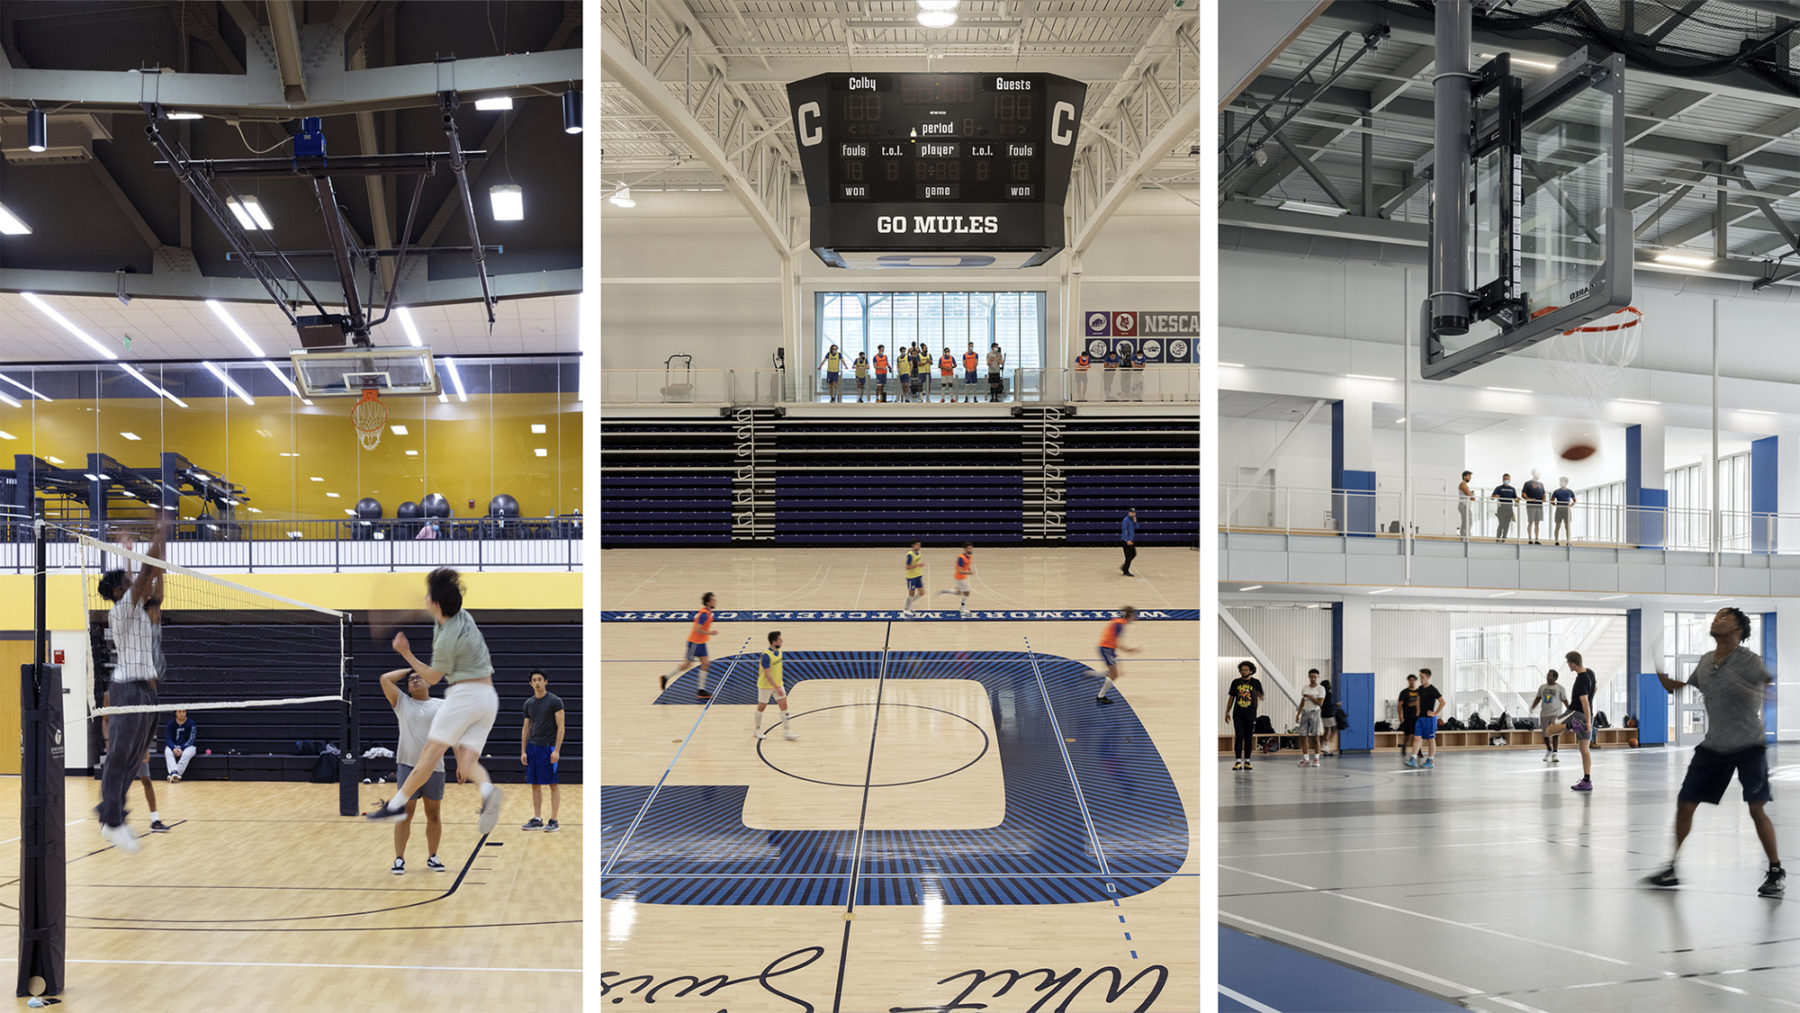 composite image of 3 different gymnasium spaces with activity within